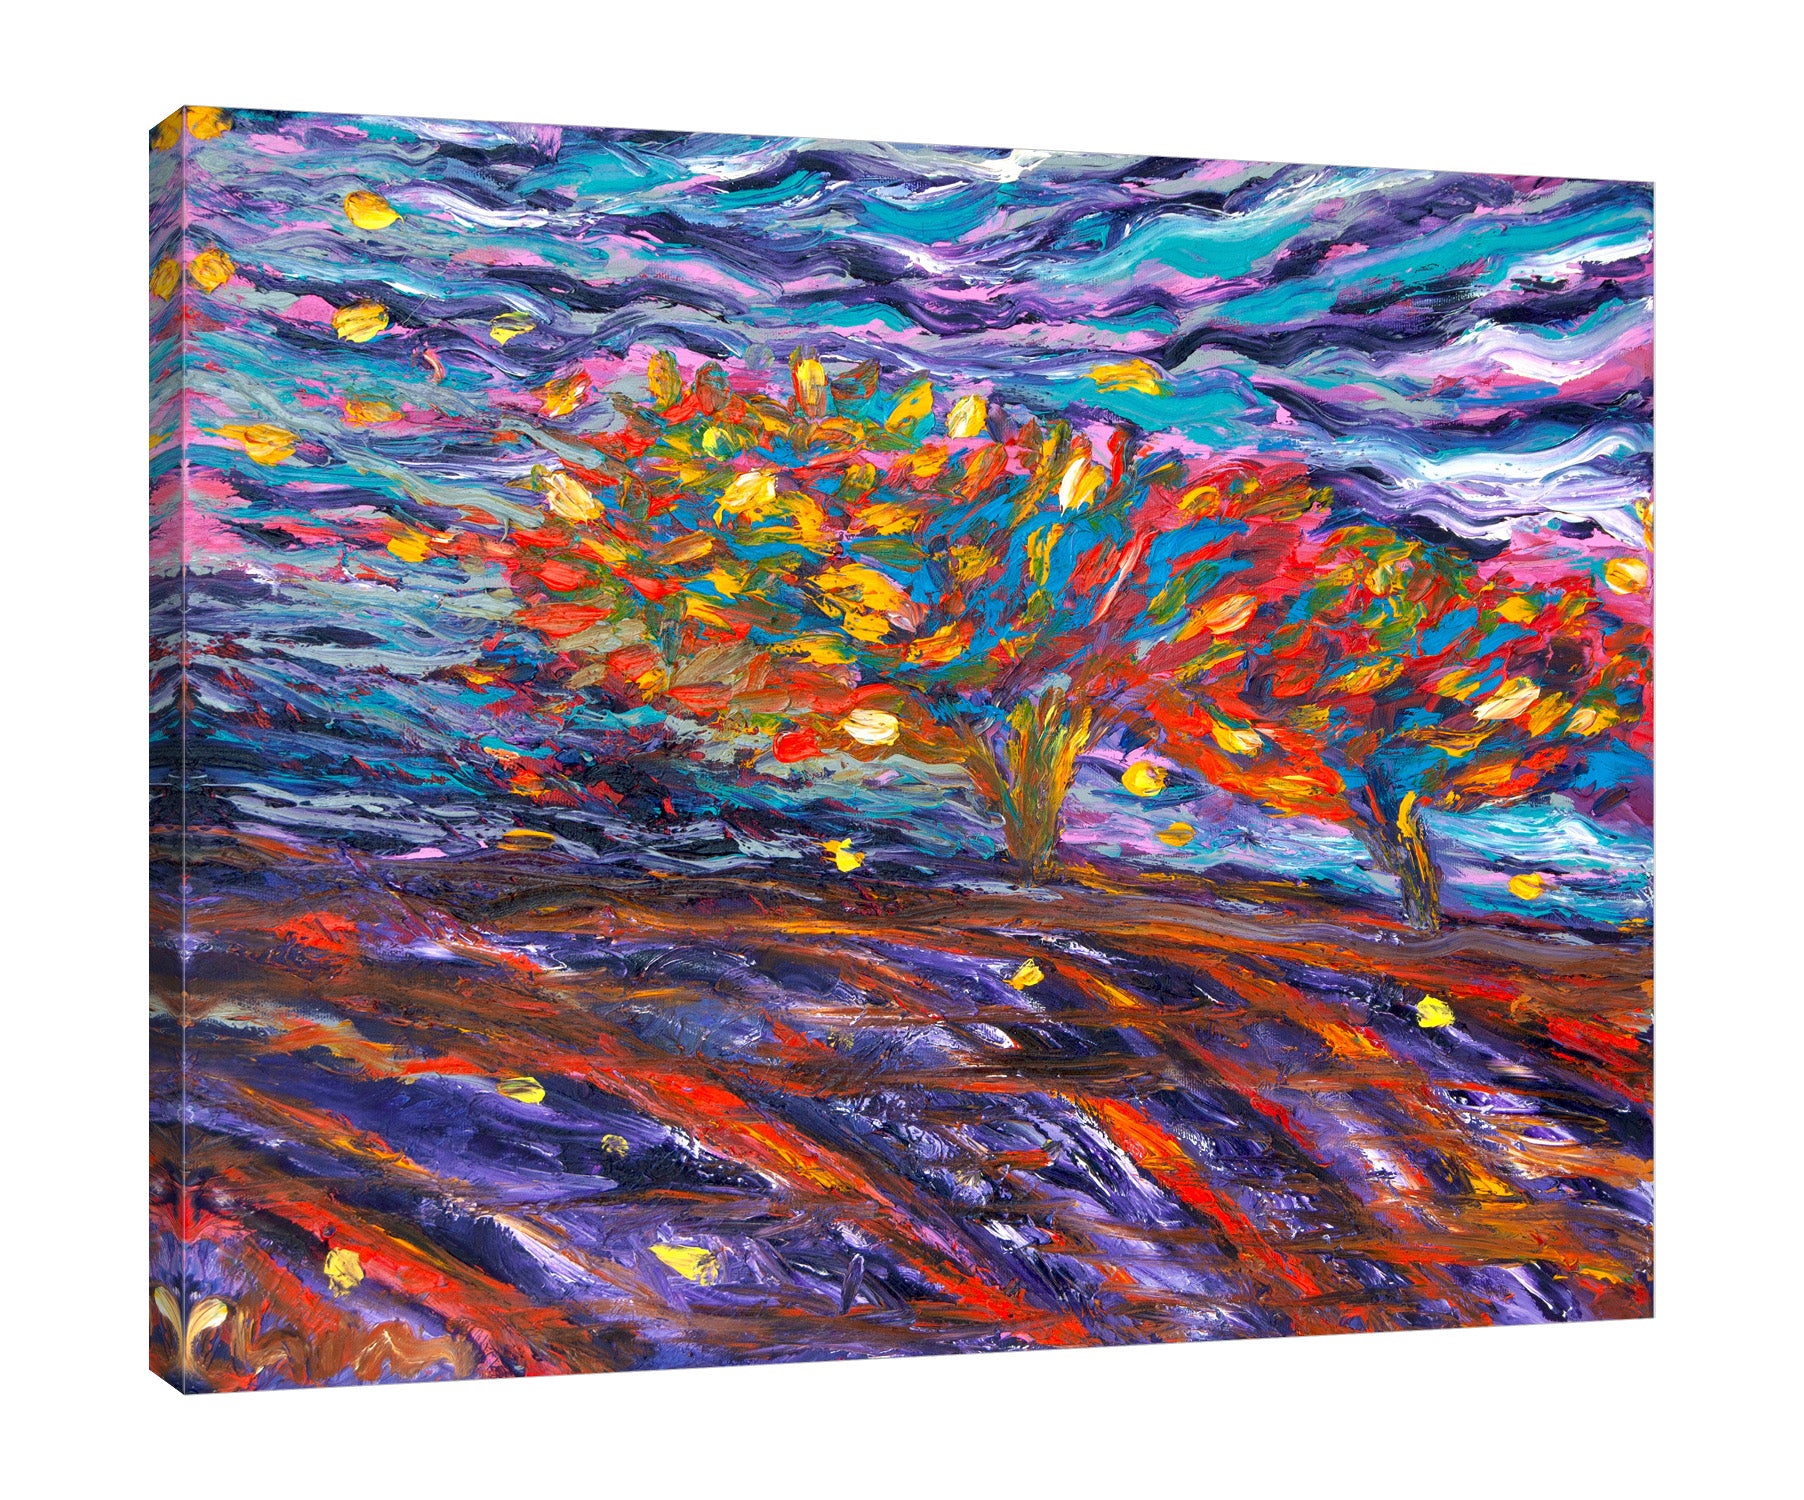 Chiara-Magni,Modern & Contemporary,Landscape & Nature,Finger-paint,trees,tree,swirls,blue,violet,red,leaves,swirl,